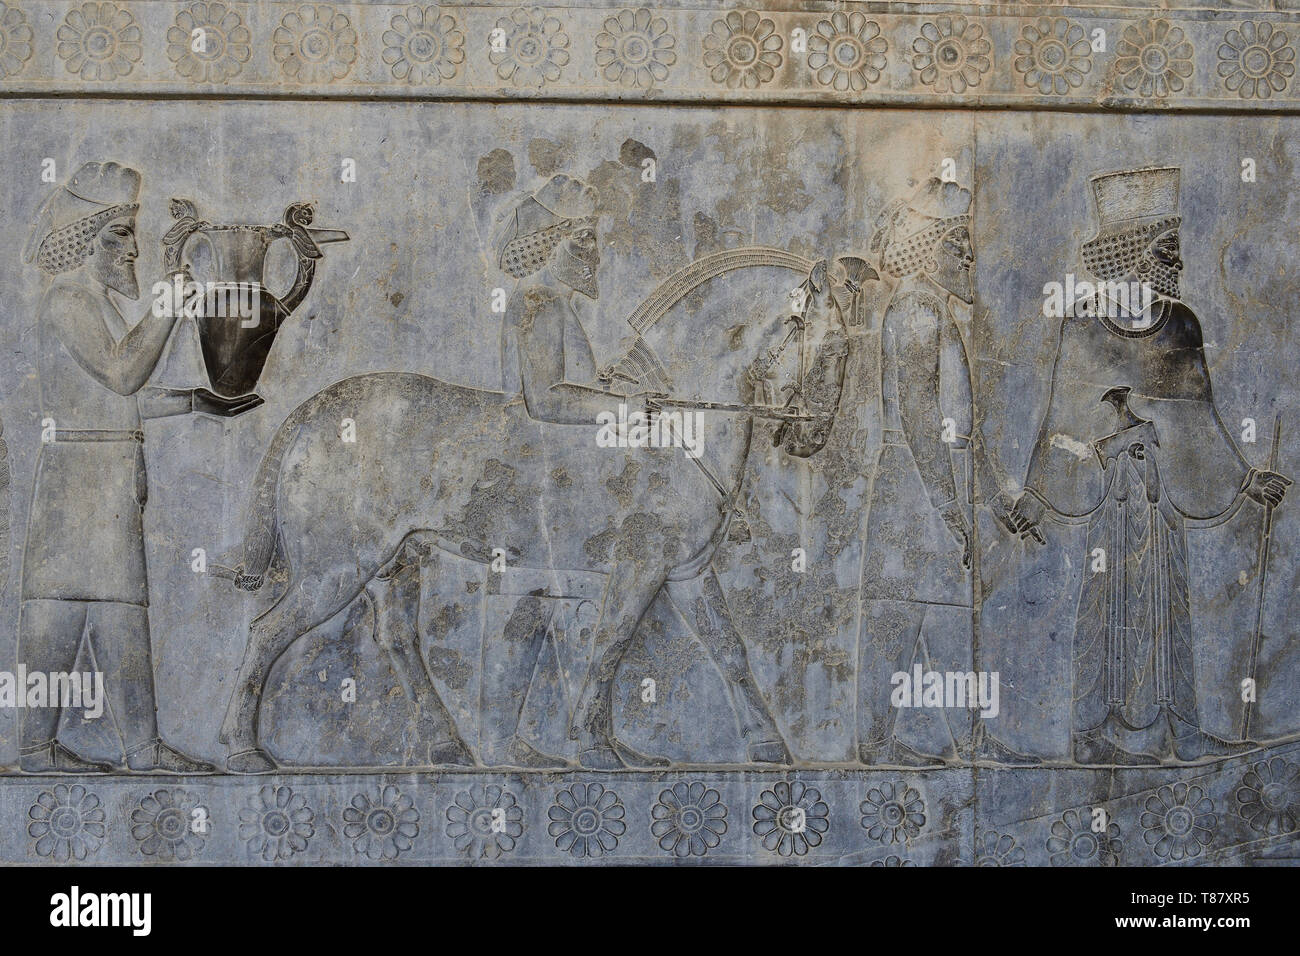 The beautiful reliefs in the ruins of Ancient Persepolis Complex of Near Eastern civilisation with persian architecture, Pars - Iran. Stock Photo